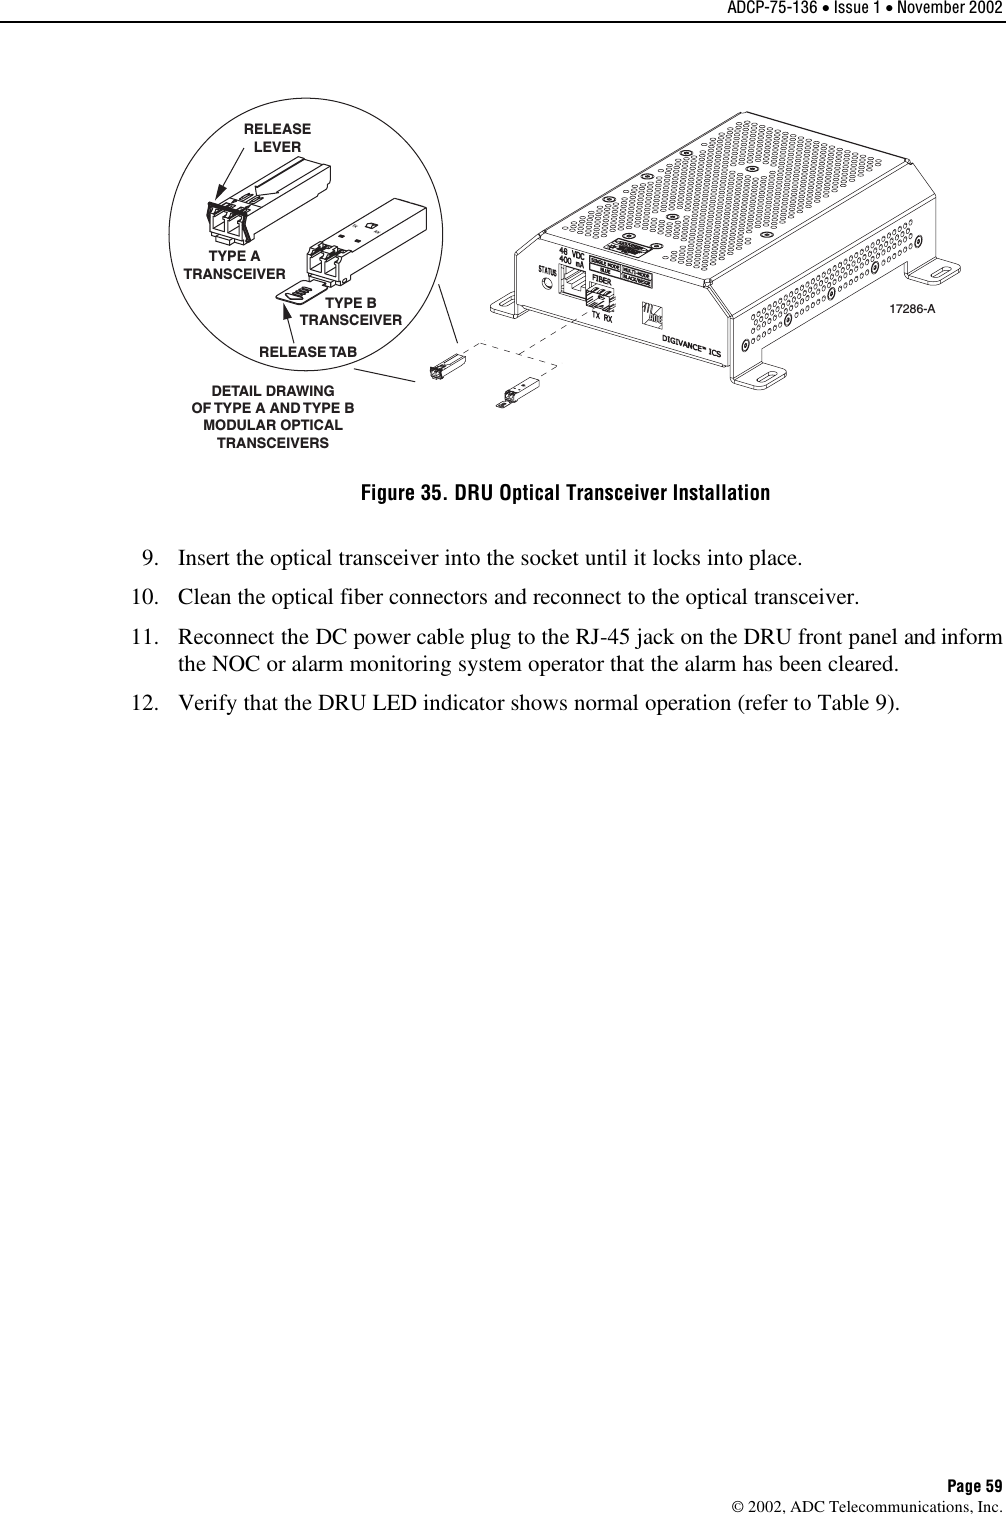 ADCP-75-136 • Issue 1 • November 2002 Page 59 ©2002, ADC Telecommunications, Inc.TXRXDETAIL DRAWINGOF TYPE A AND TYPE BMODULAR OPTICALTRANSCEIVERSTX RXTYPE ATRANSCEIVERTYPE BTRANSCEIVERRELEASELEVERRELEASE TAB17286-AFigure 35. DRU Optical Transceiver Installation 9. Insert the optical transceiver into the socket until it locks into place.10. Clean the optical fiber connectors and reconnect to the optical transceiver.11. Reconnect the DC power cable plug to the RJ-45 jack on the DRU front panel and informthe NOC or alarm monitoring system operator that the alarm has been cleared.12. Verify that the DRU LED indicator shows normal operation (refer to Table 9).